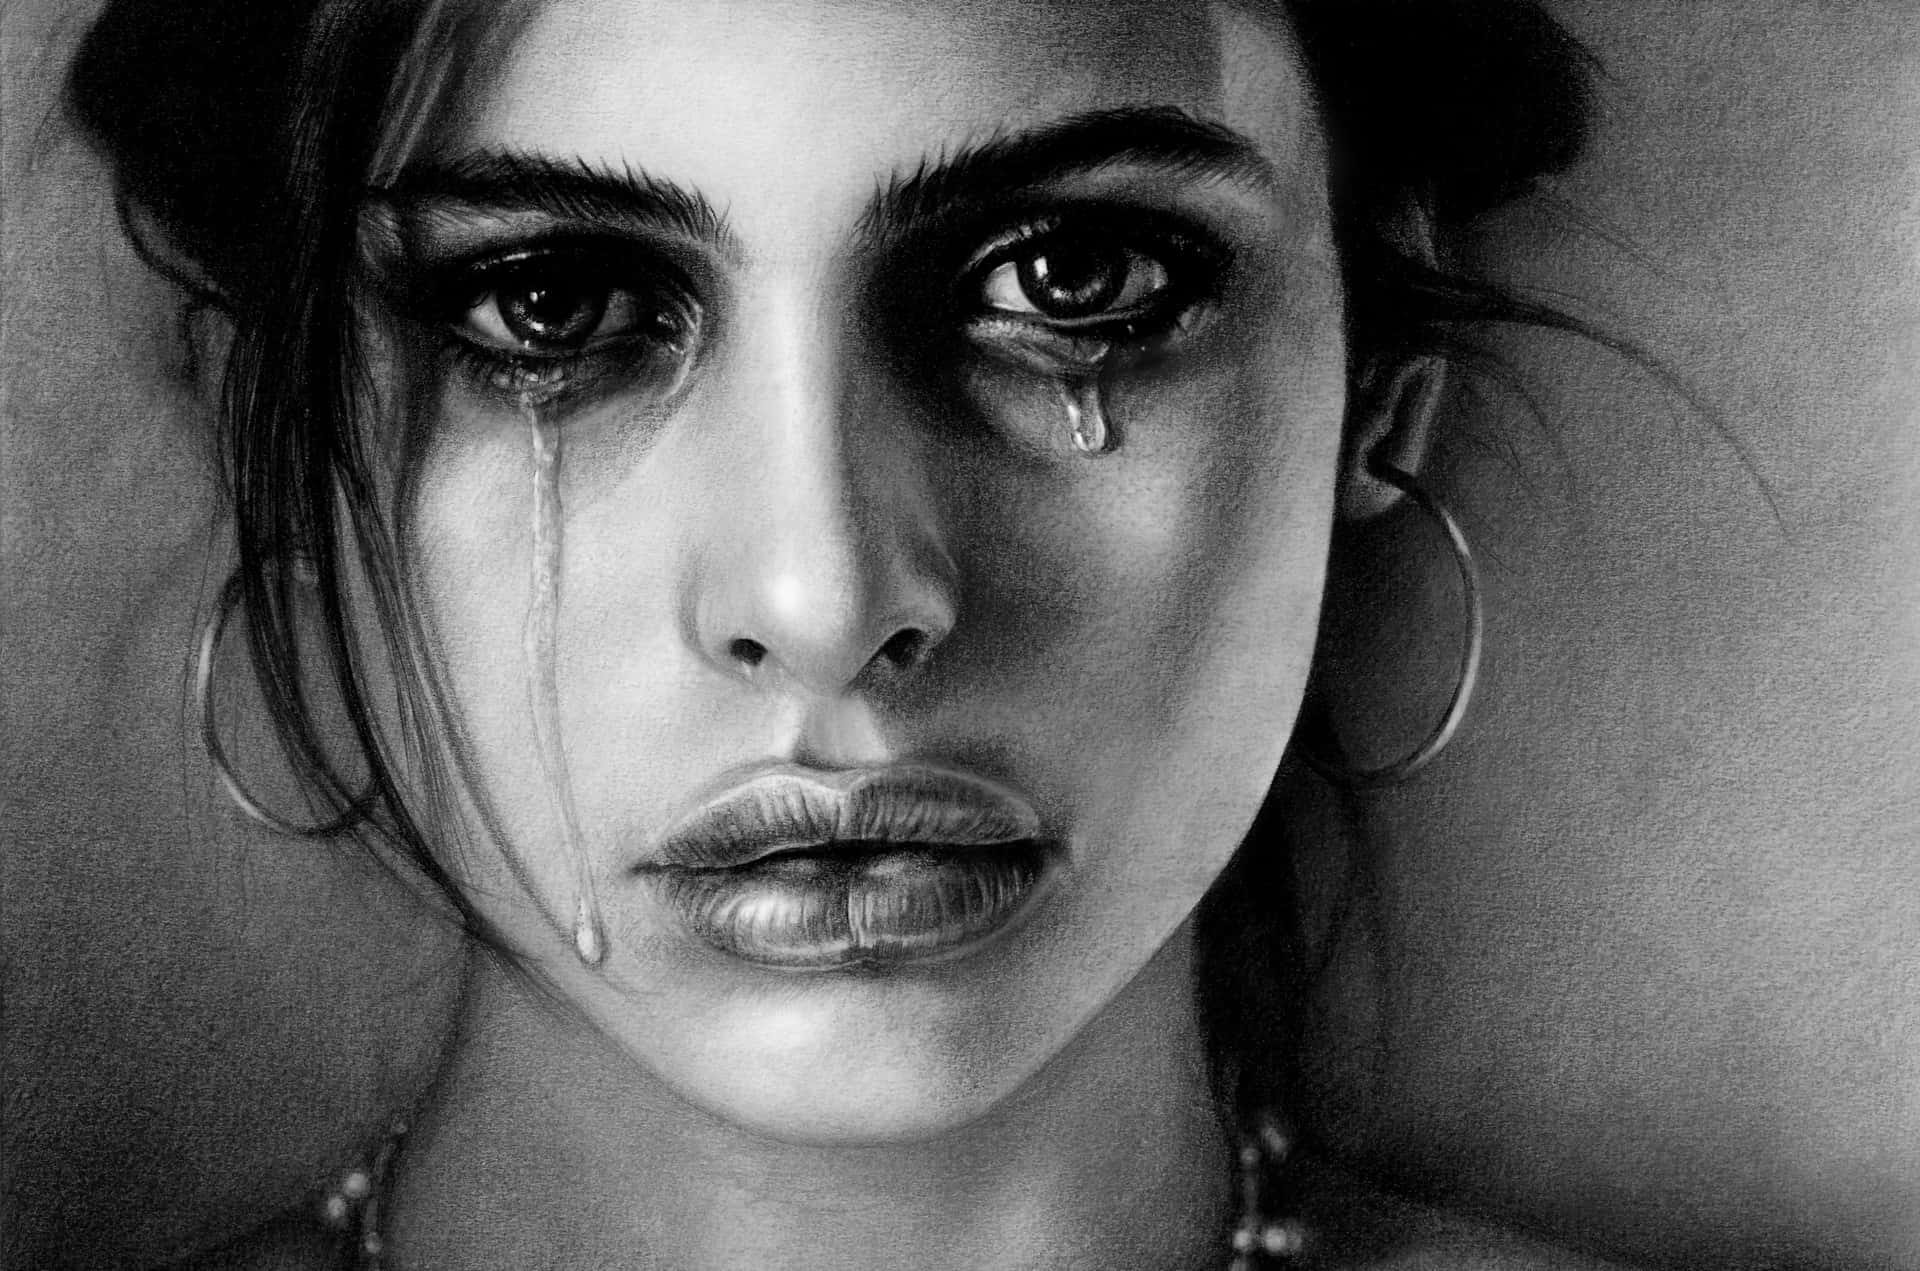 A Poignant Portrait Of A Crying Girl